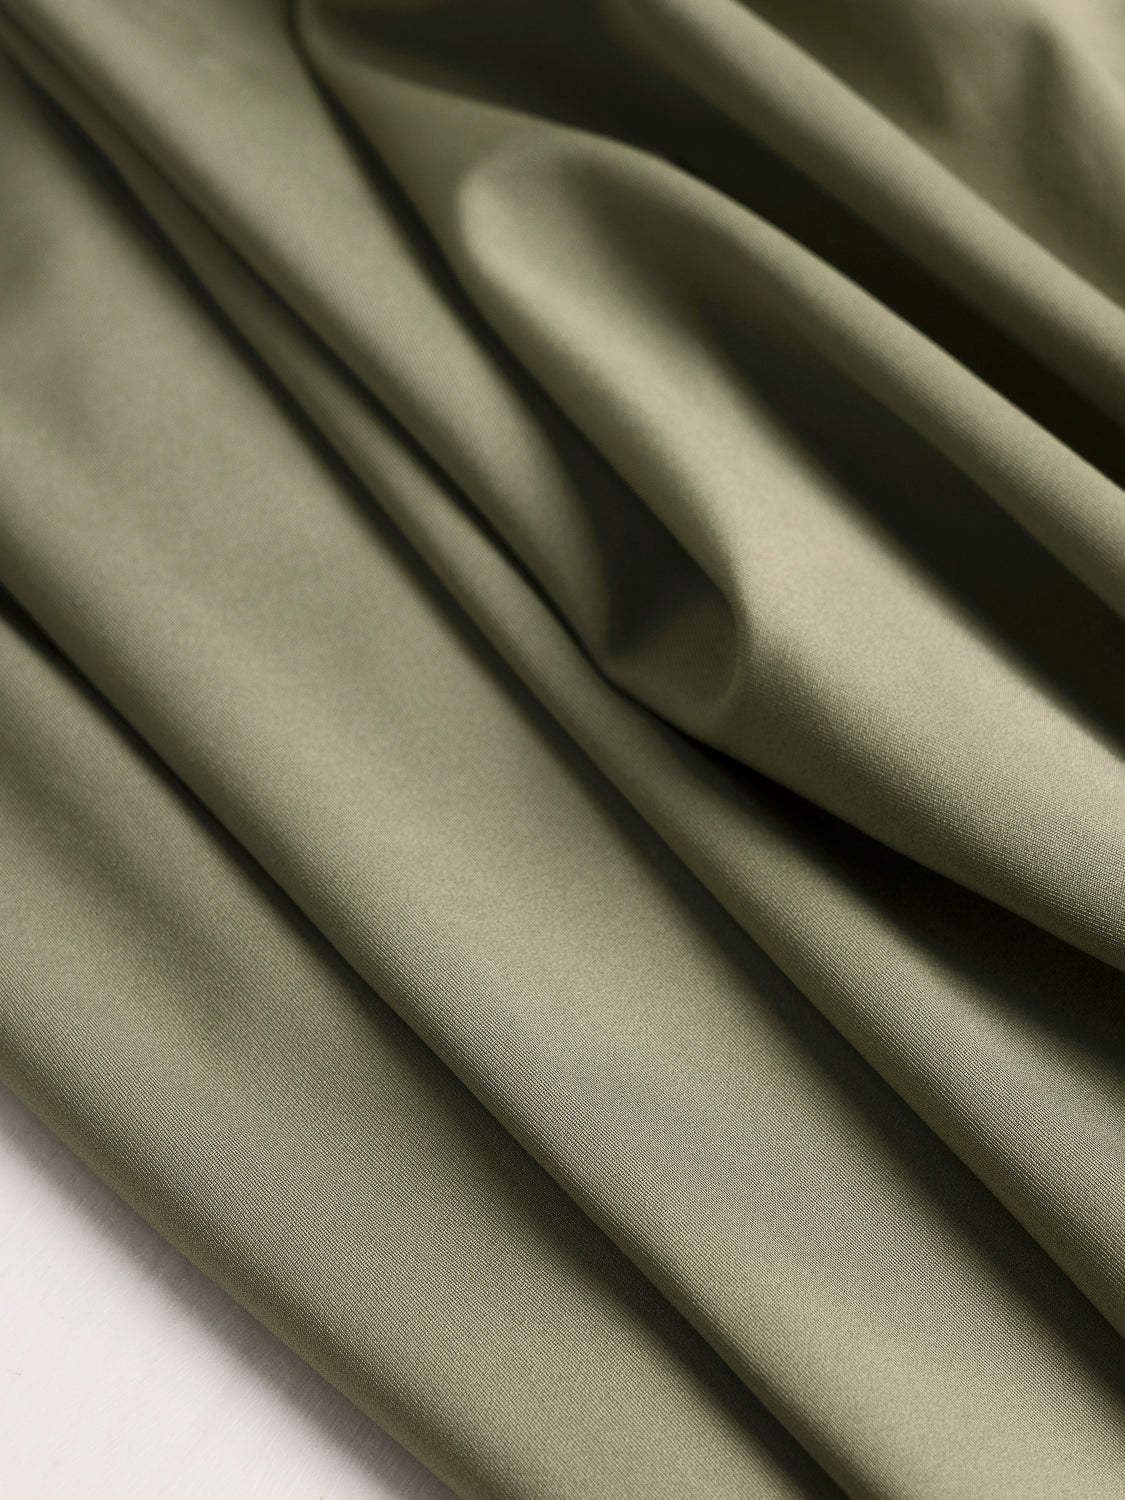 China Polyester Moisture Wicking Fabric Manufacturers and